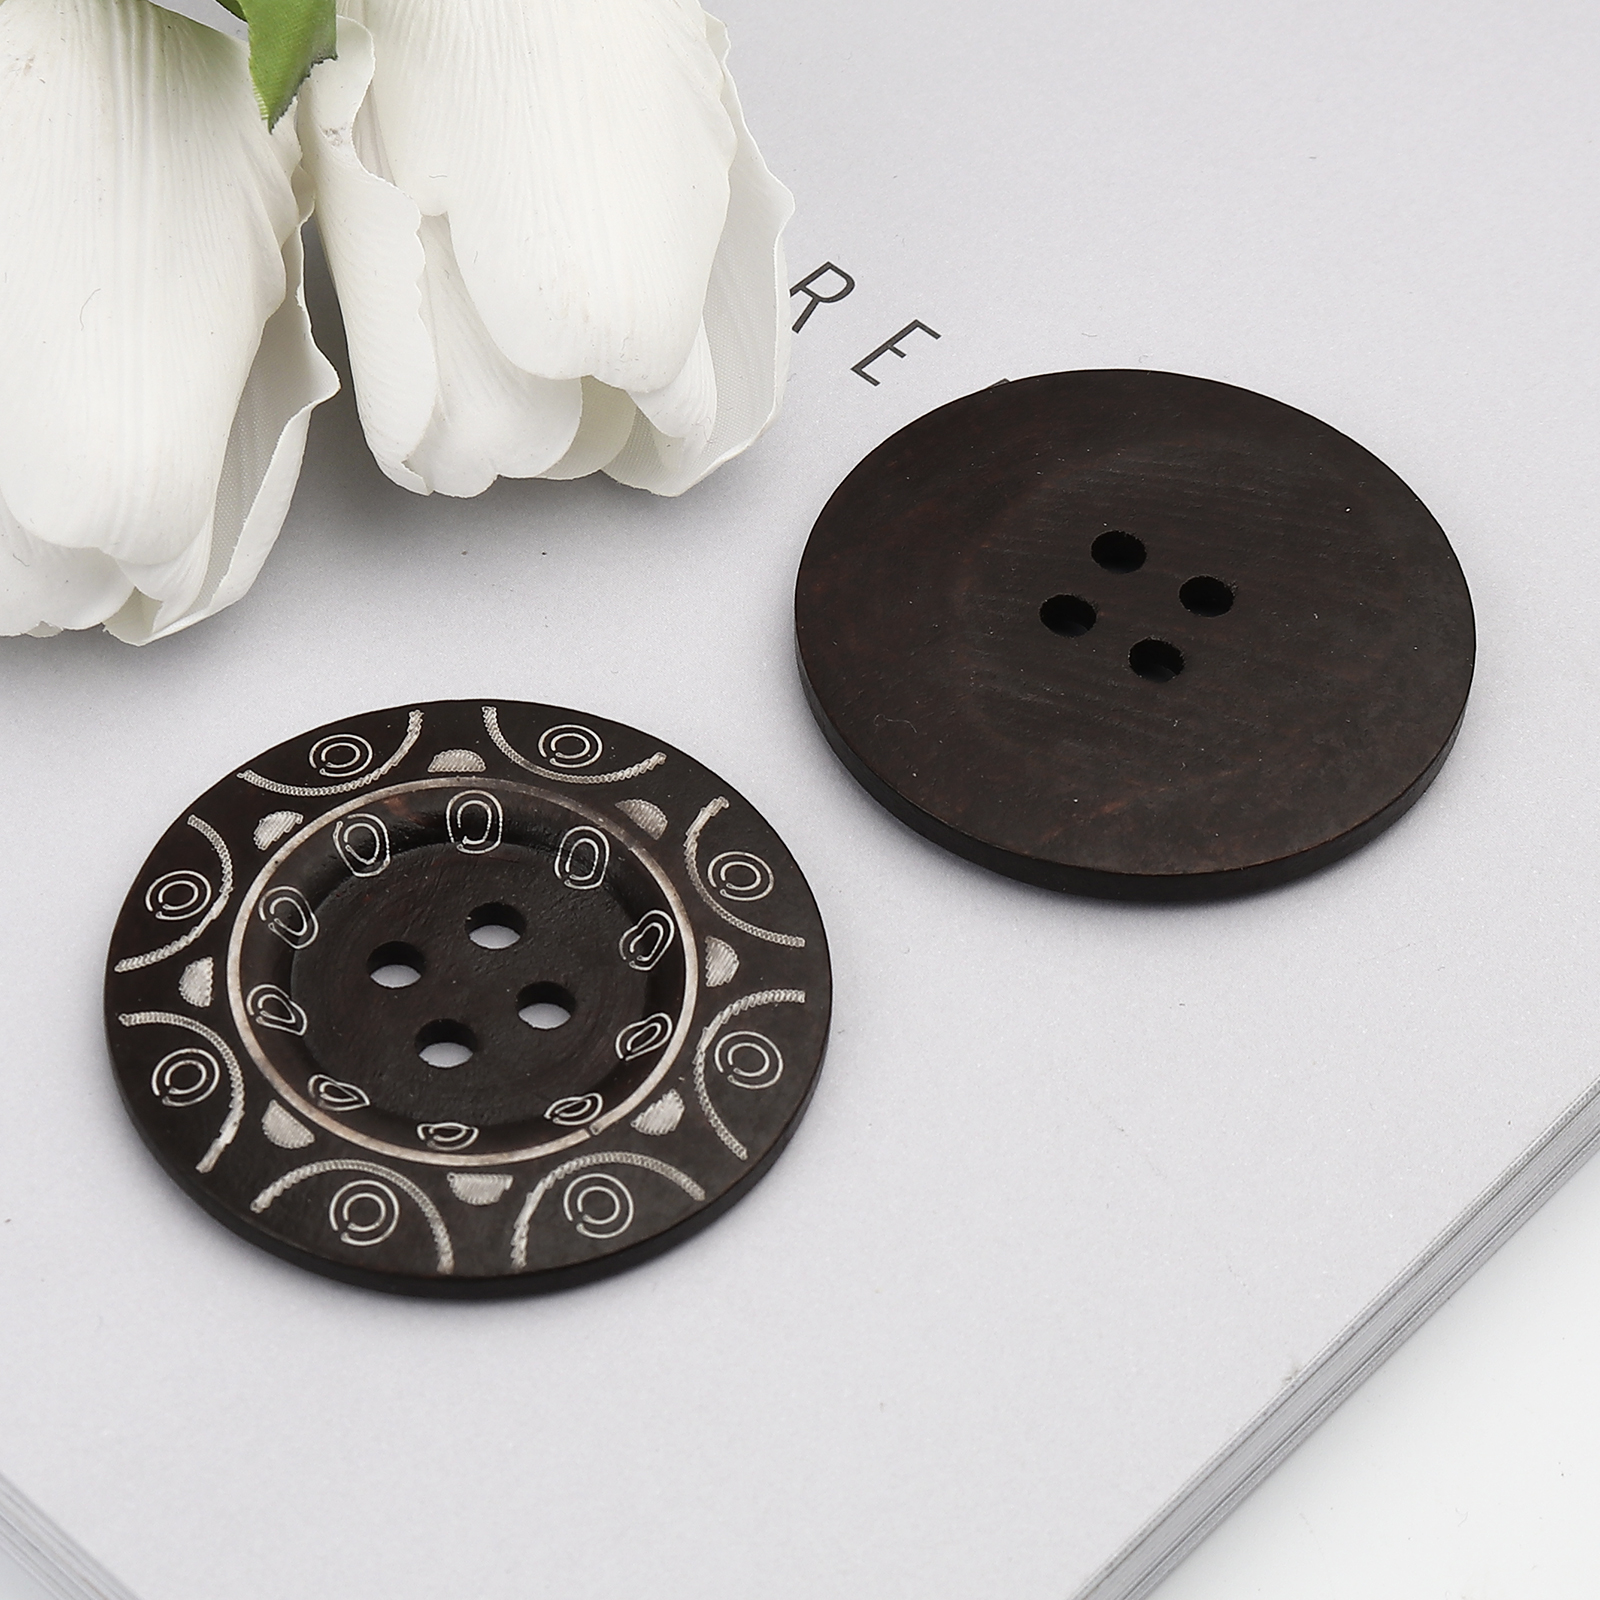 Picture of Wood Sewing Buttons Scrapbooking 4 Holes Round Dark Coffee Circle 6cm Dia., 10 PCs